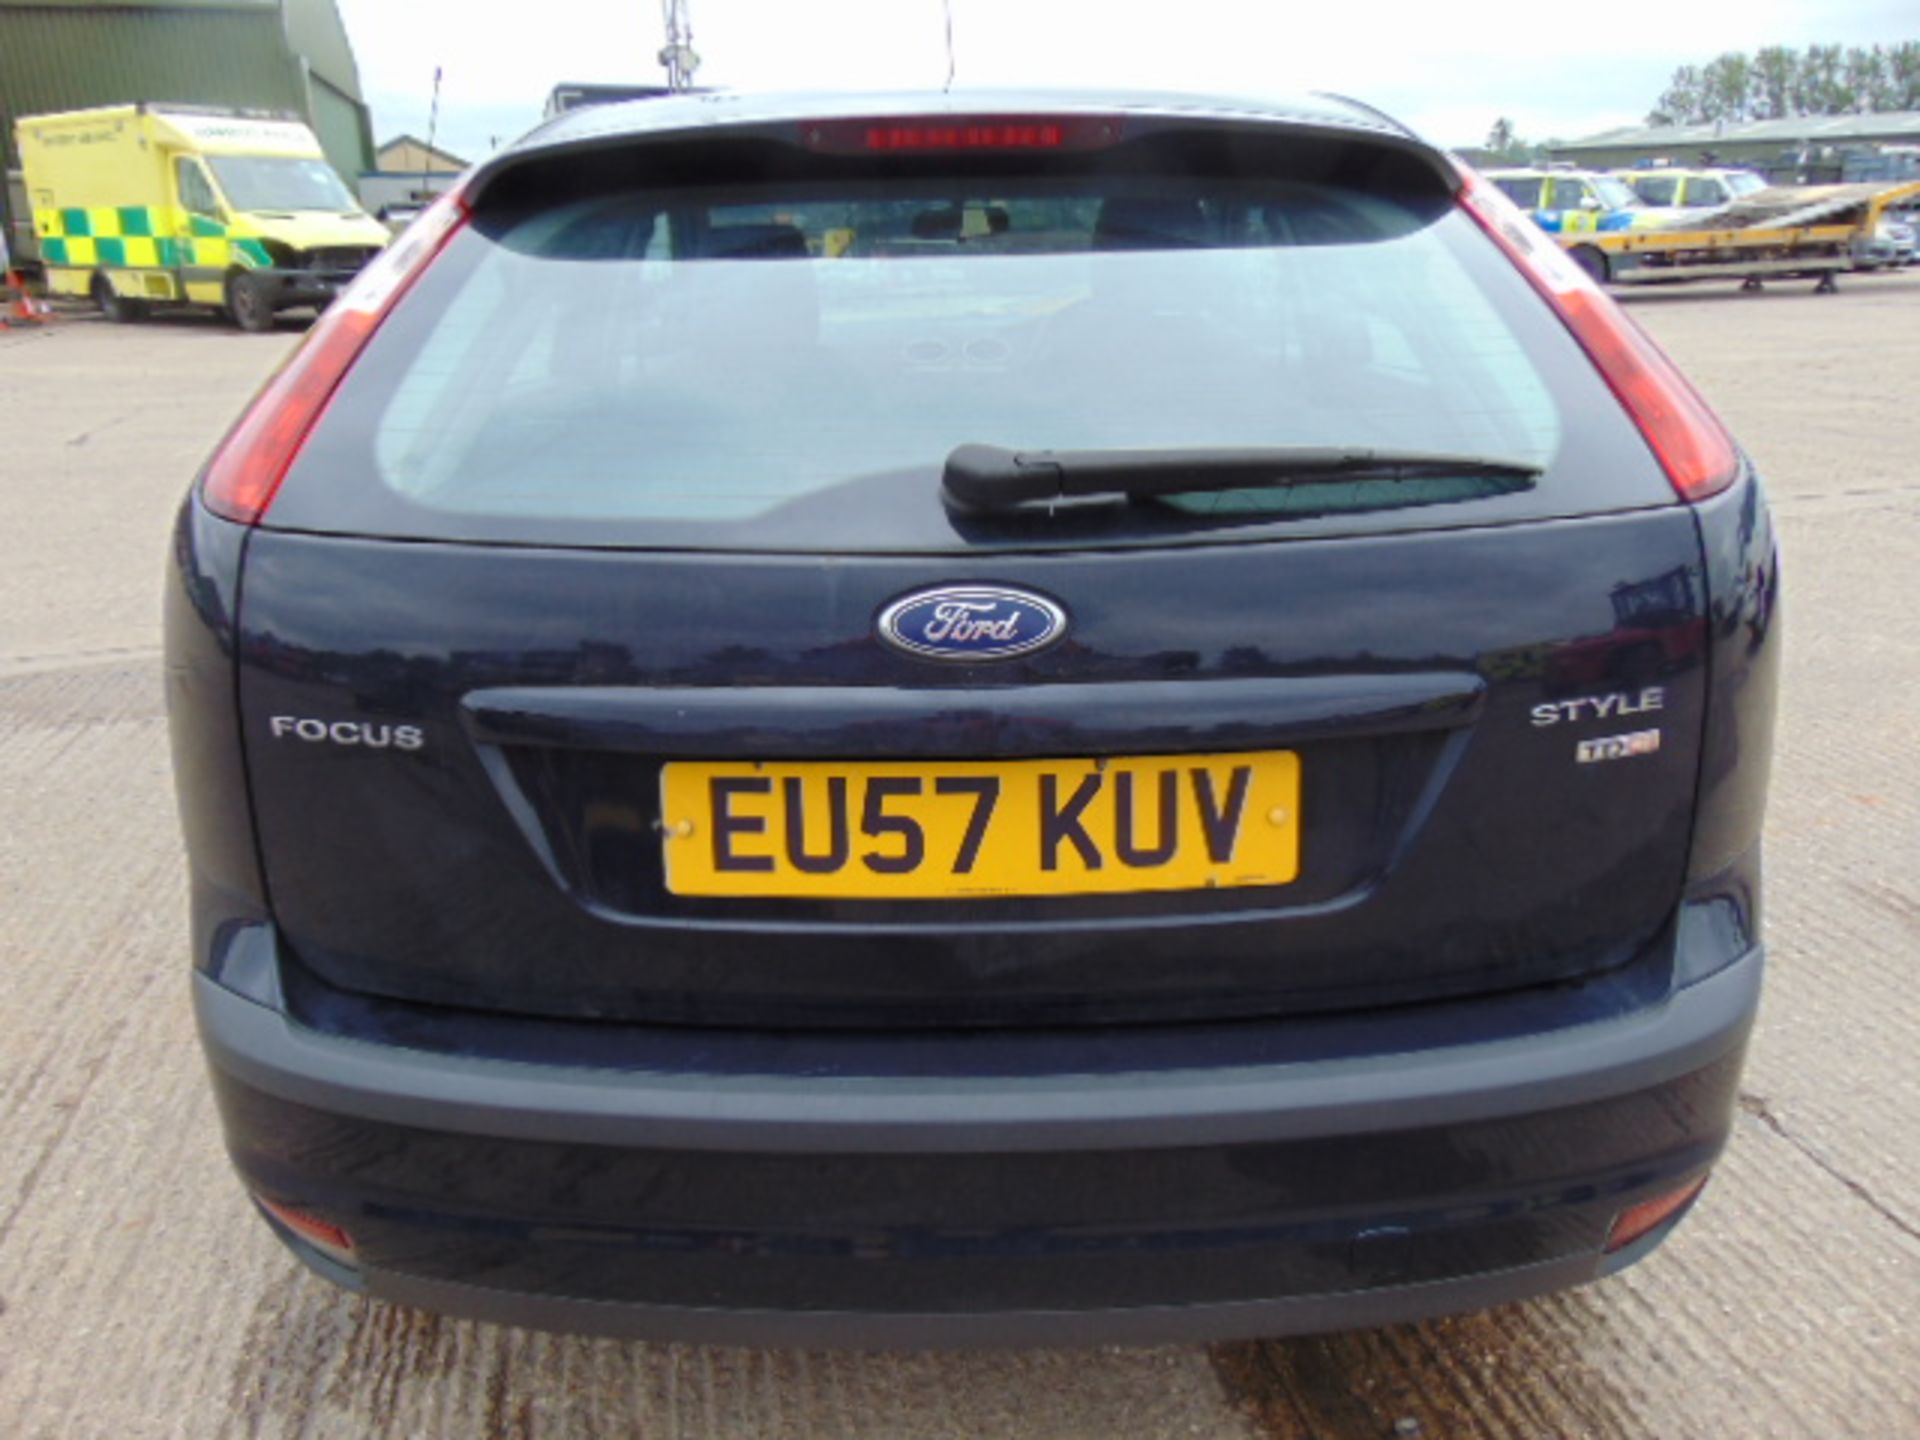 Ford Focus 1.8 TDCI Style Hatchback - Image 7 of 18